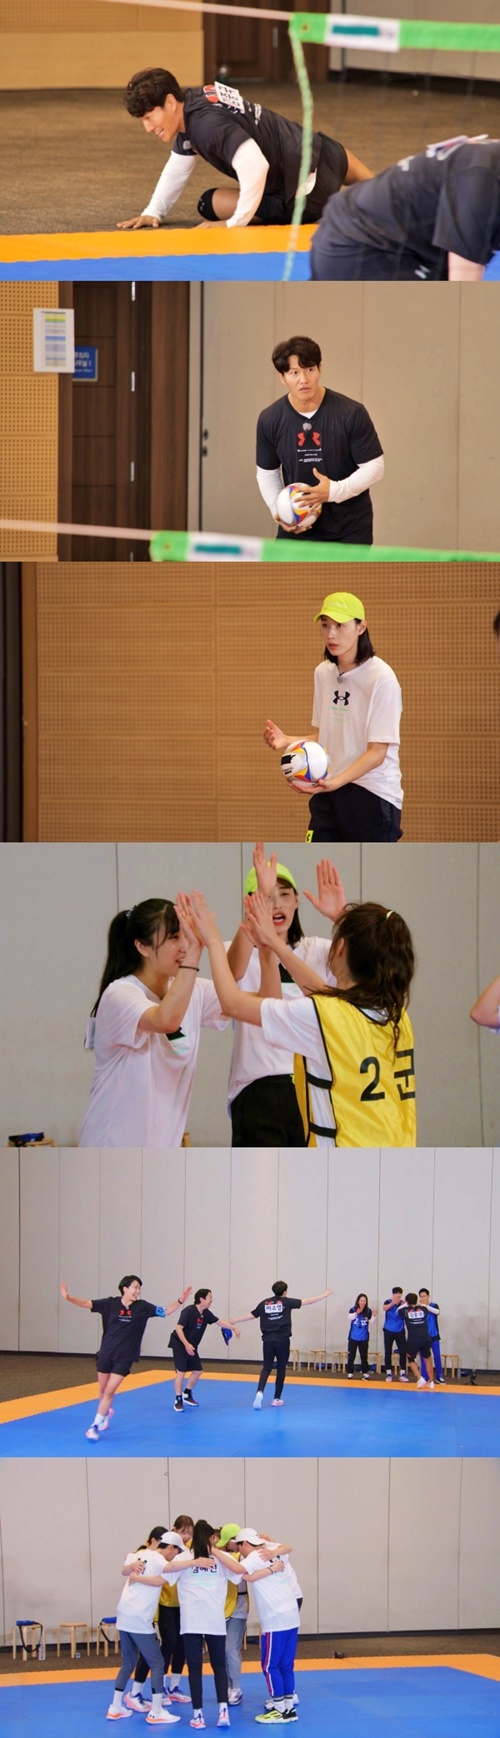 SBS Running Man, which will be broadcasted at 4:55 pm on the 26th, will have an unusual footwear game that has made the scene a mess with the previous level tension.The recent recording was conducted by seven womens volleyball national teams who wrote the semi-finals at the 2020 Tokyo Olympics as guests and conducted an unusual footwear mission that combines volleyball and footwear.The female volleyball players surprised everyone by showing their national level skills from foot volleyball.Unlike other members who died, Kim Jong-kook, who was a captain, continued his provocative provocation with Kim Yeon-koung, Submit me! But despite his full confidence, he continued to misfire.In the end, the same team Oji Young exploded, You should have received it by lowering your posture! Kim Jong-kook was stuck in a toothless Tiger.Womens volleyball team players have raised Tension with excessive fighting and ceremony from the beginning.The members said, If you give me your hand, you will have a high five, and if you do not fight, you will save your strength. However, the players did not care, but they boasted of the national team tension and knocked down the members.The unique footwear mission scene with national womens volleyball players will be unveiled at Running Man, which will be broadcast at 4:55 pm on Sunday, the 26th.photoSBS